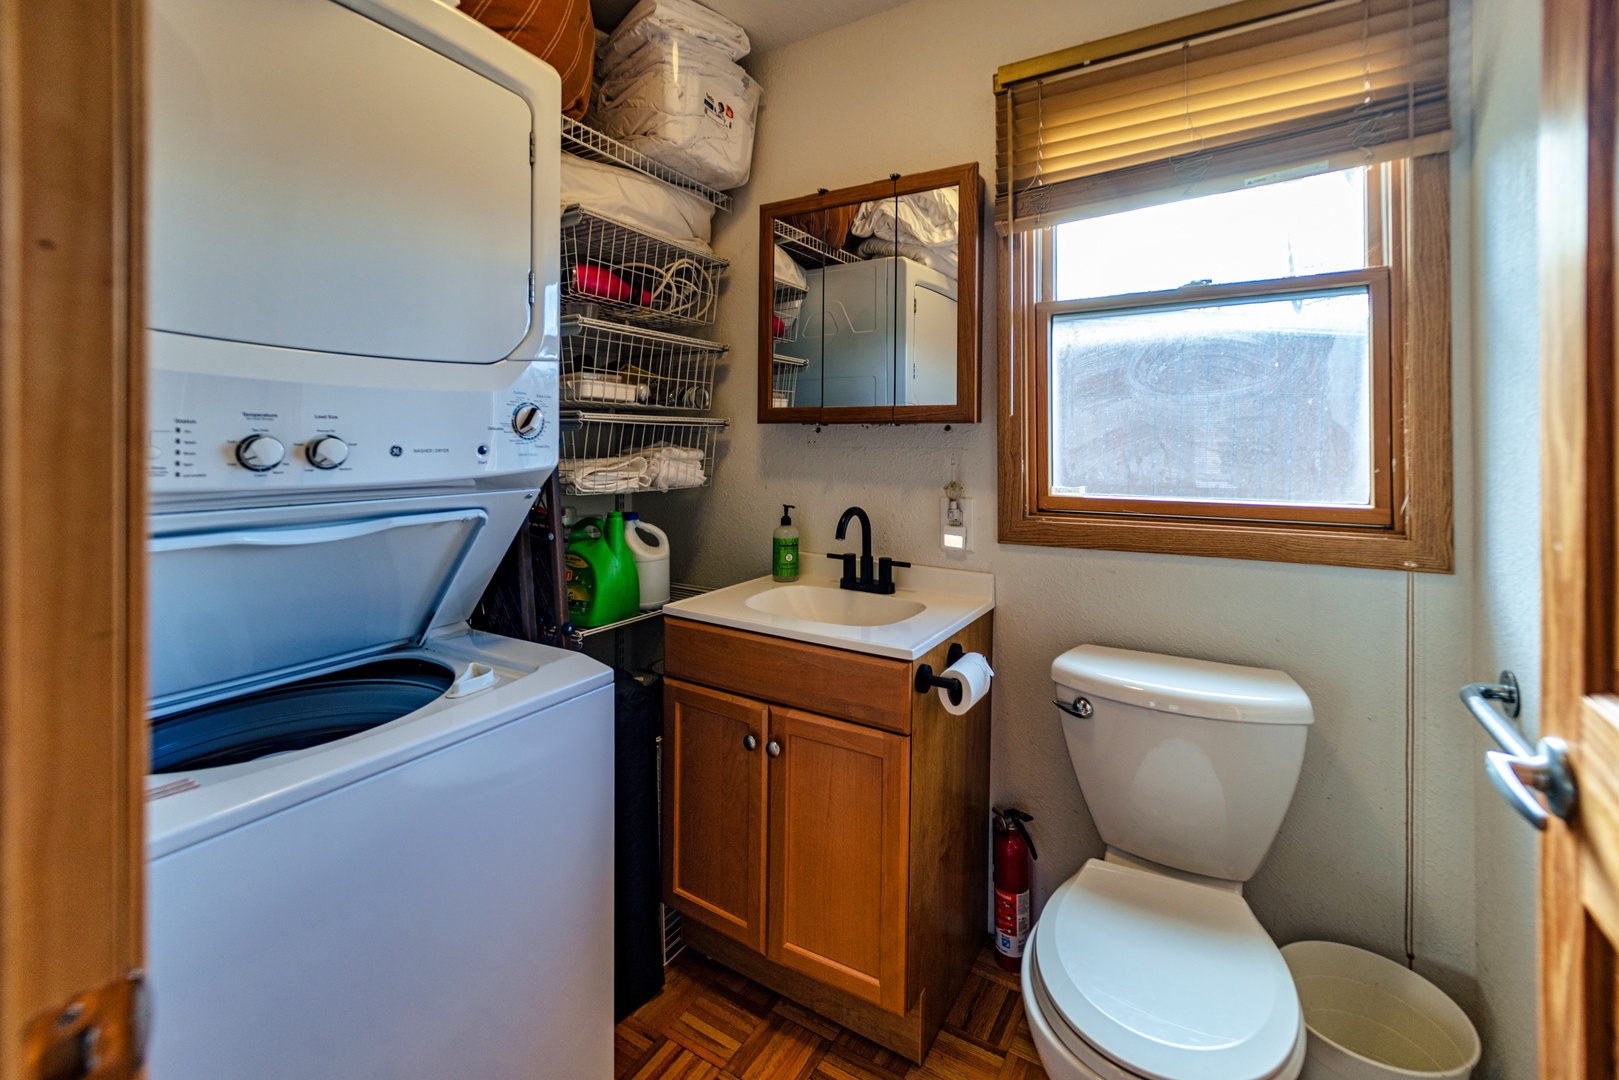 A convenient half bath with laundry is available off the main living area